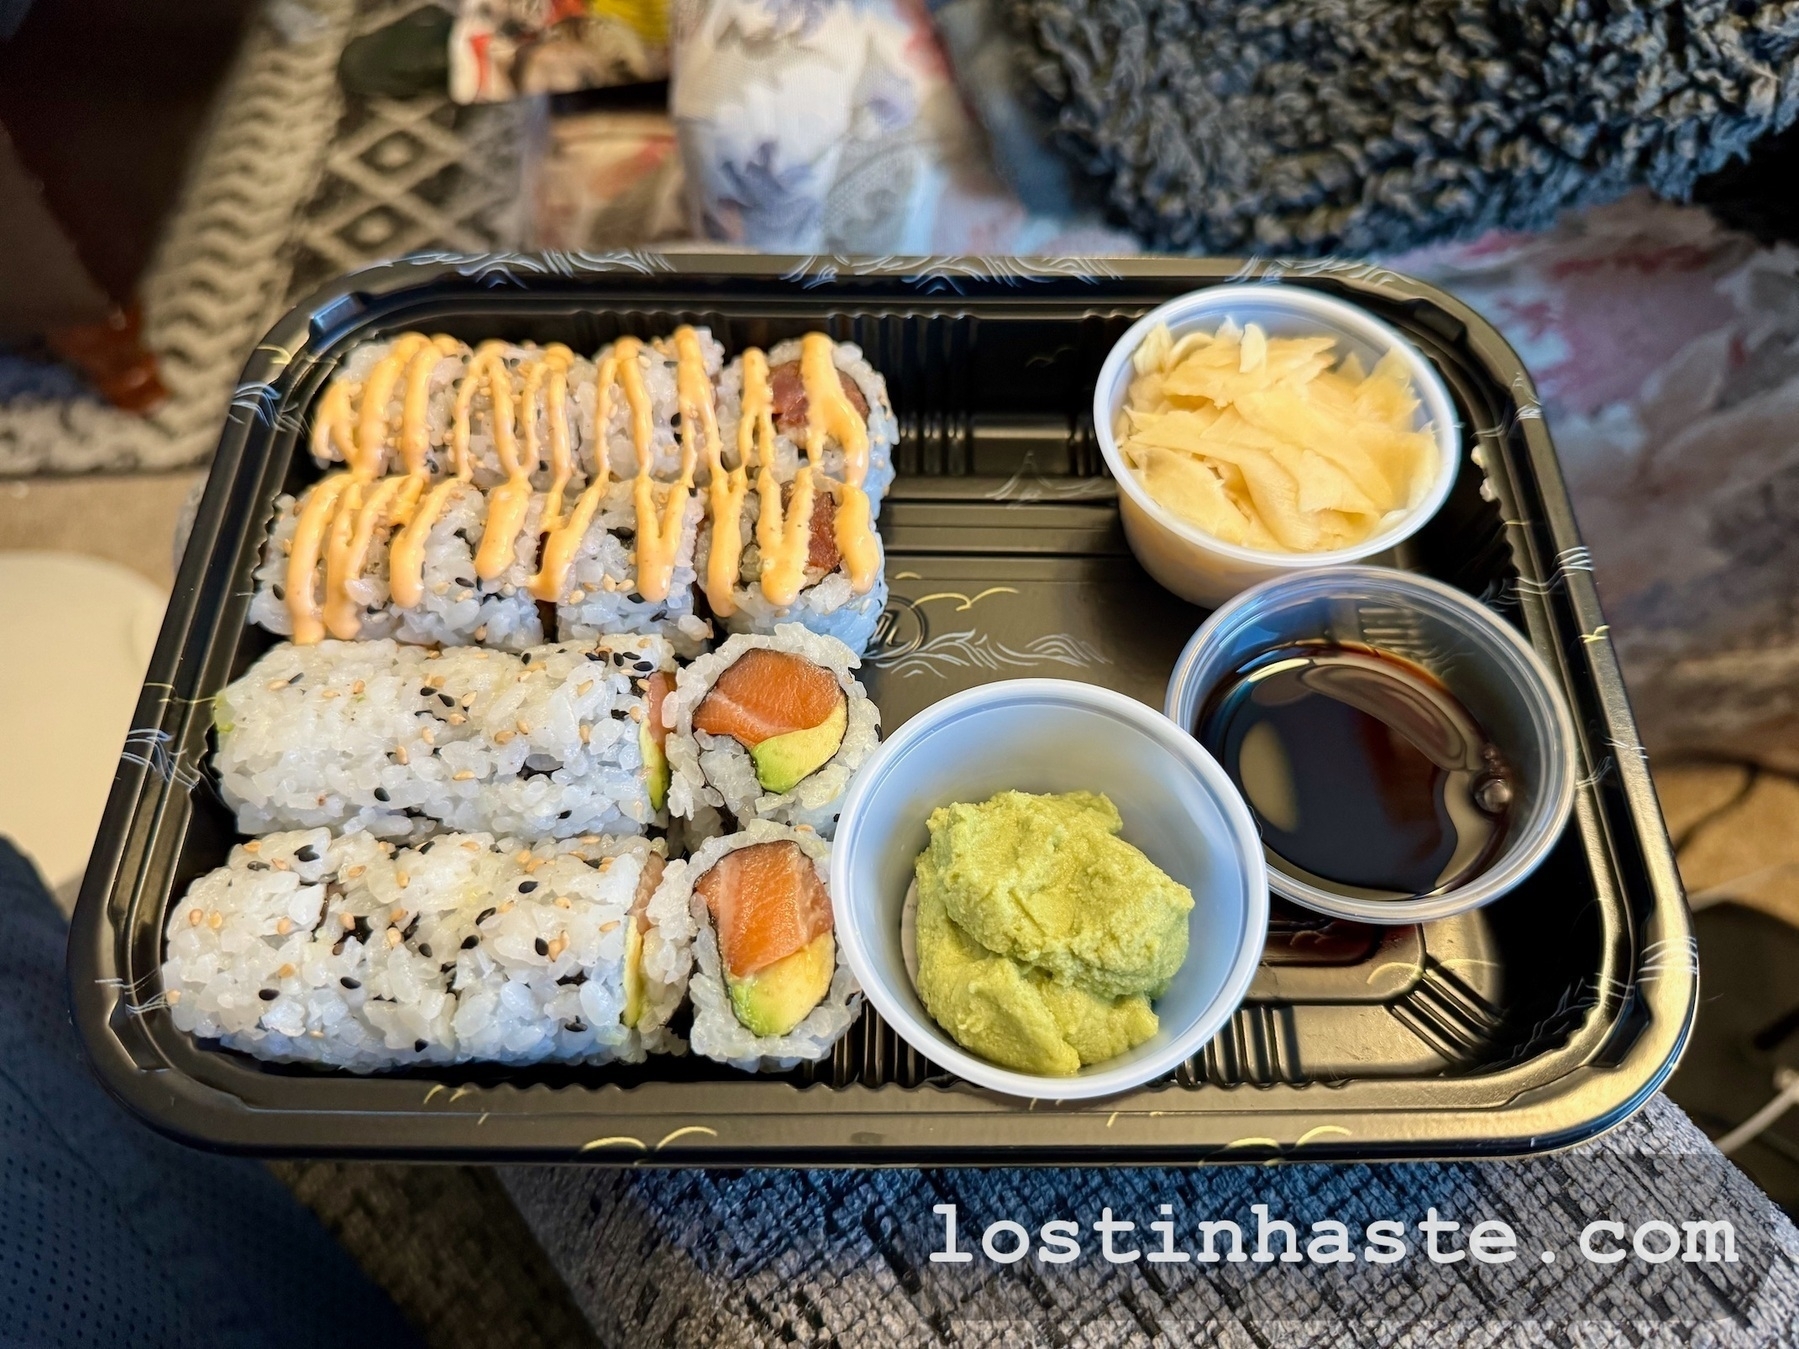 Sushi rolls in a tray with condiments; wasabi, pickled ginger, and soy sauce on the side, on a patterned fabric background.